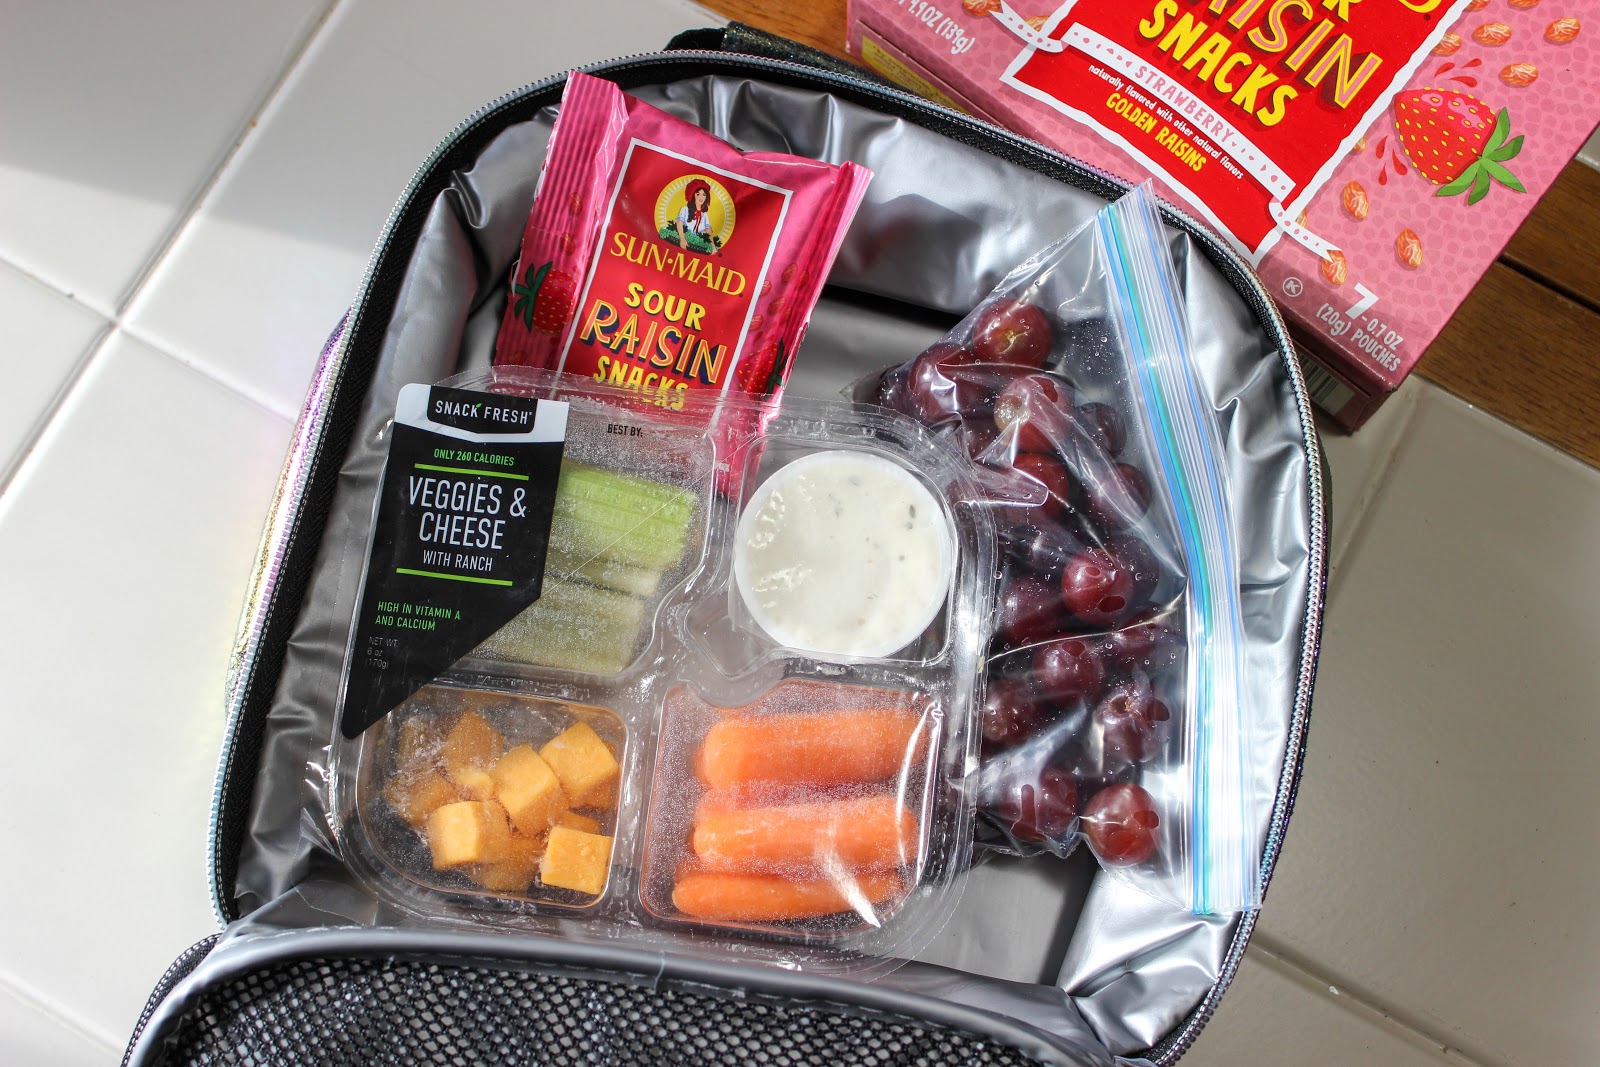 lunchbox with grapes and veggie and cheese tray with Sun-Maid Sour Raisin Snacks.